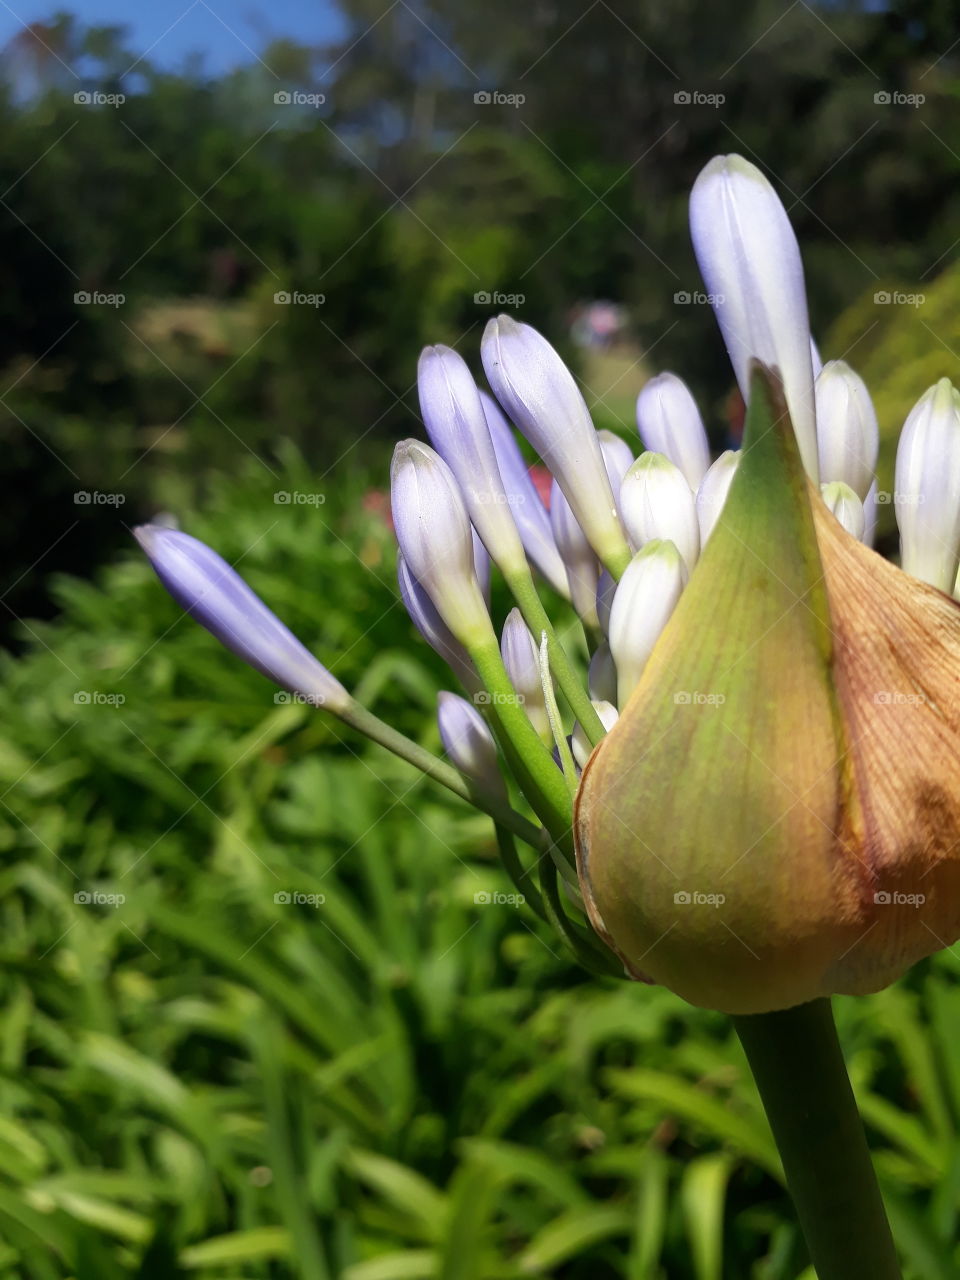 Agapanthus, or Lily of the Nile.